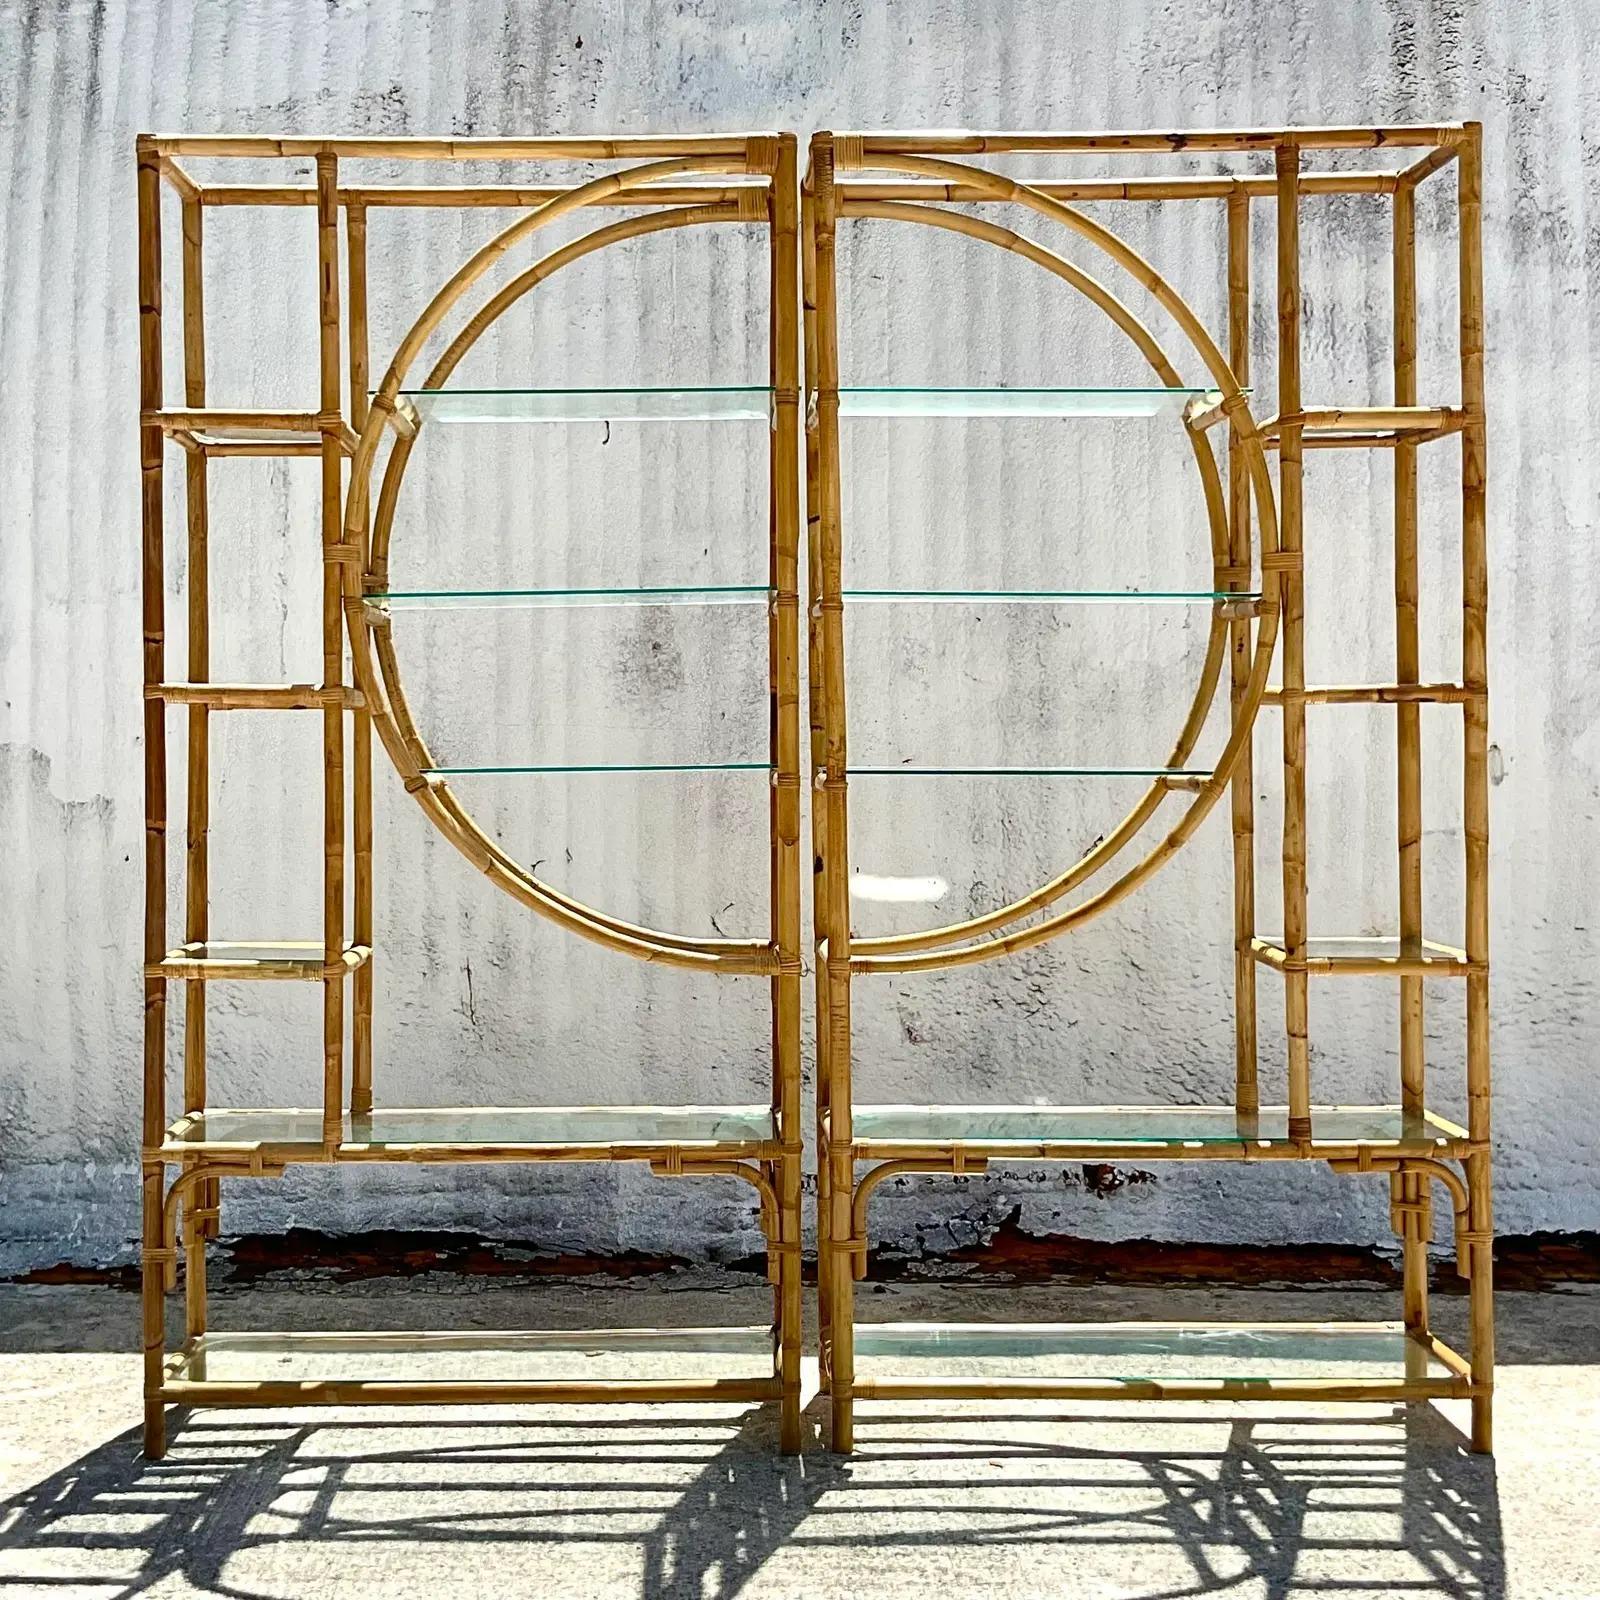 A fantastic pair of vintage Coastal Etagere. Beautiful bamboo frame with a distinctive circle design in the center. Dramatic, yet subtle at the same time. Inset glass shelves. Acquired from a Palm Beach estate.